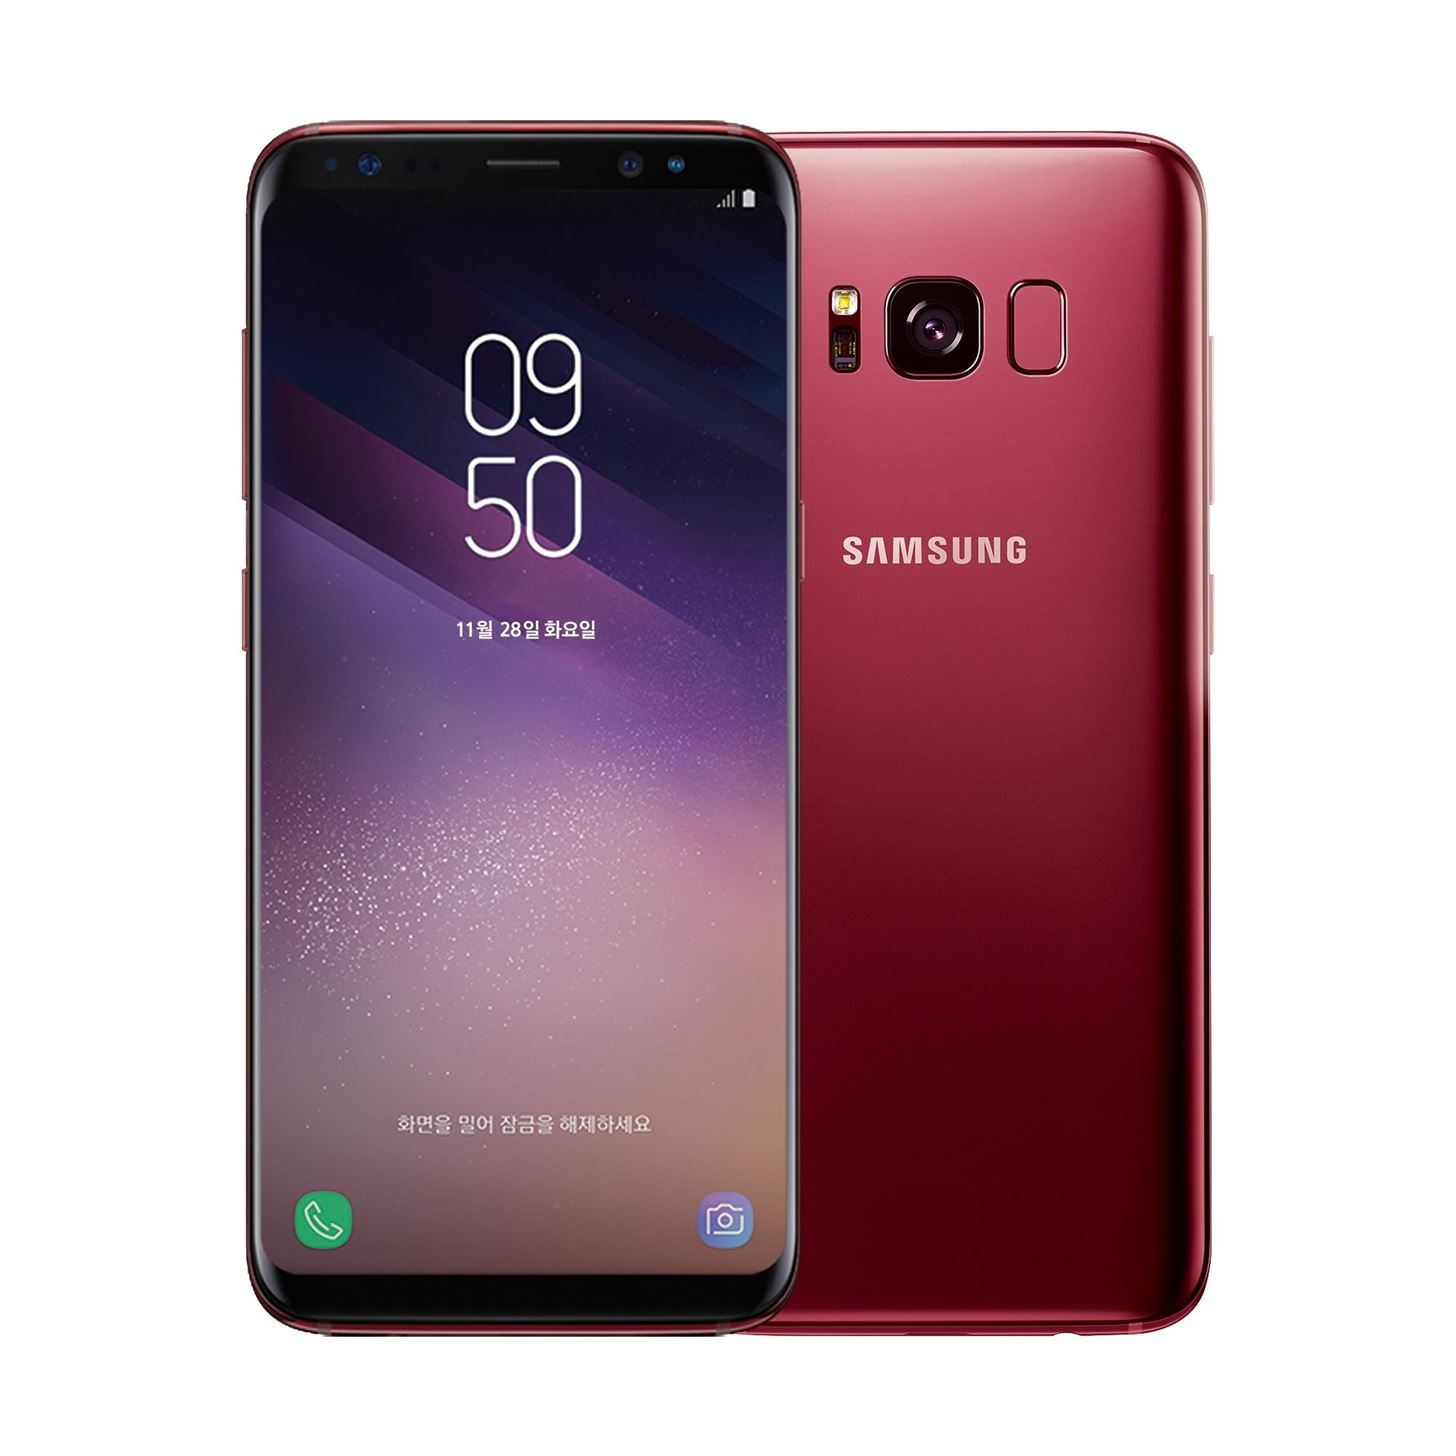 Samsung's Galaxy S9 Could Arrive in a Burgundy Red Color